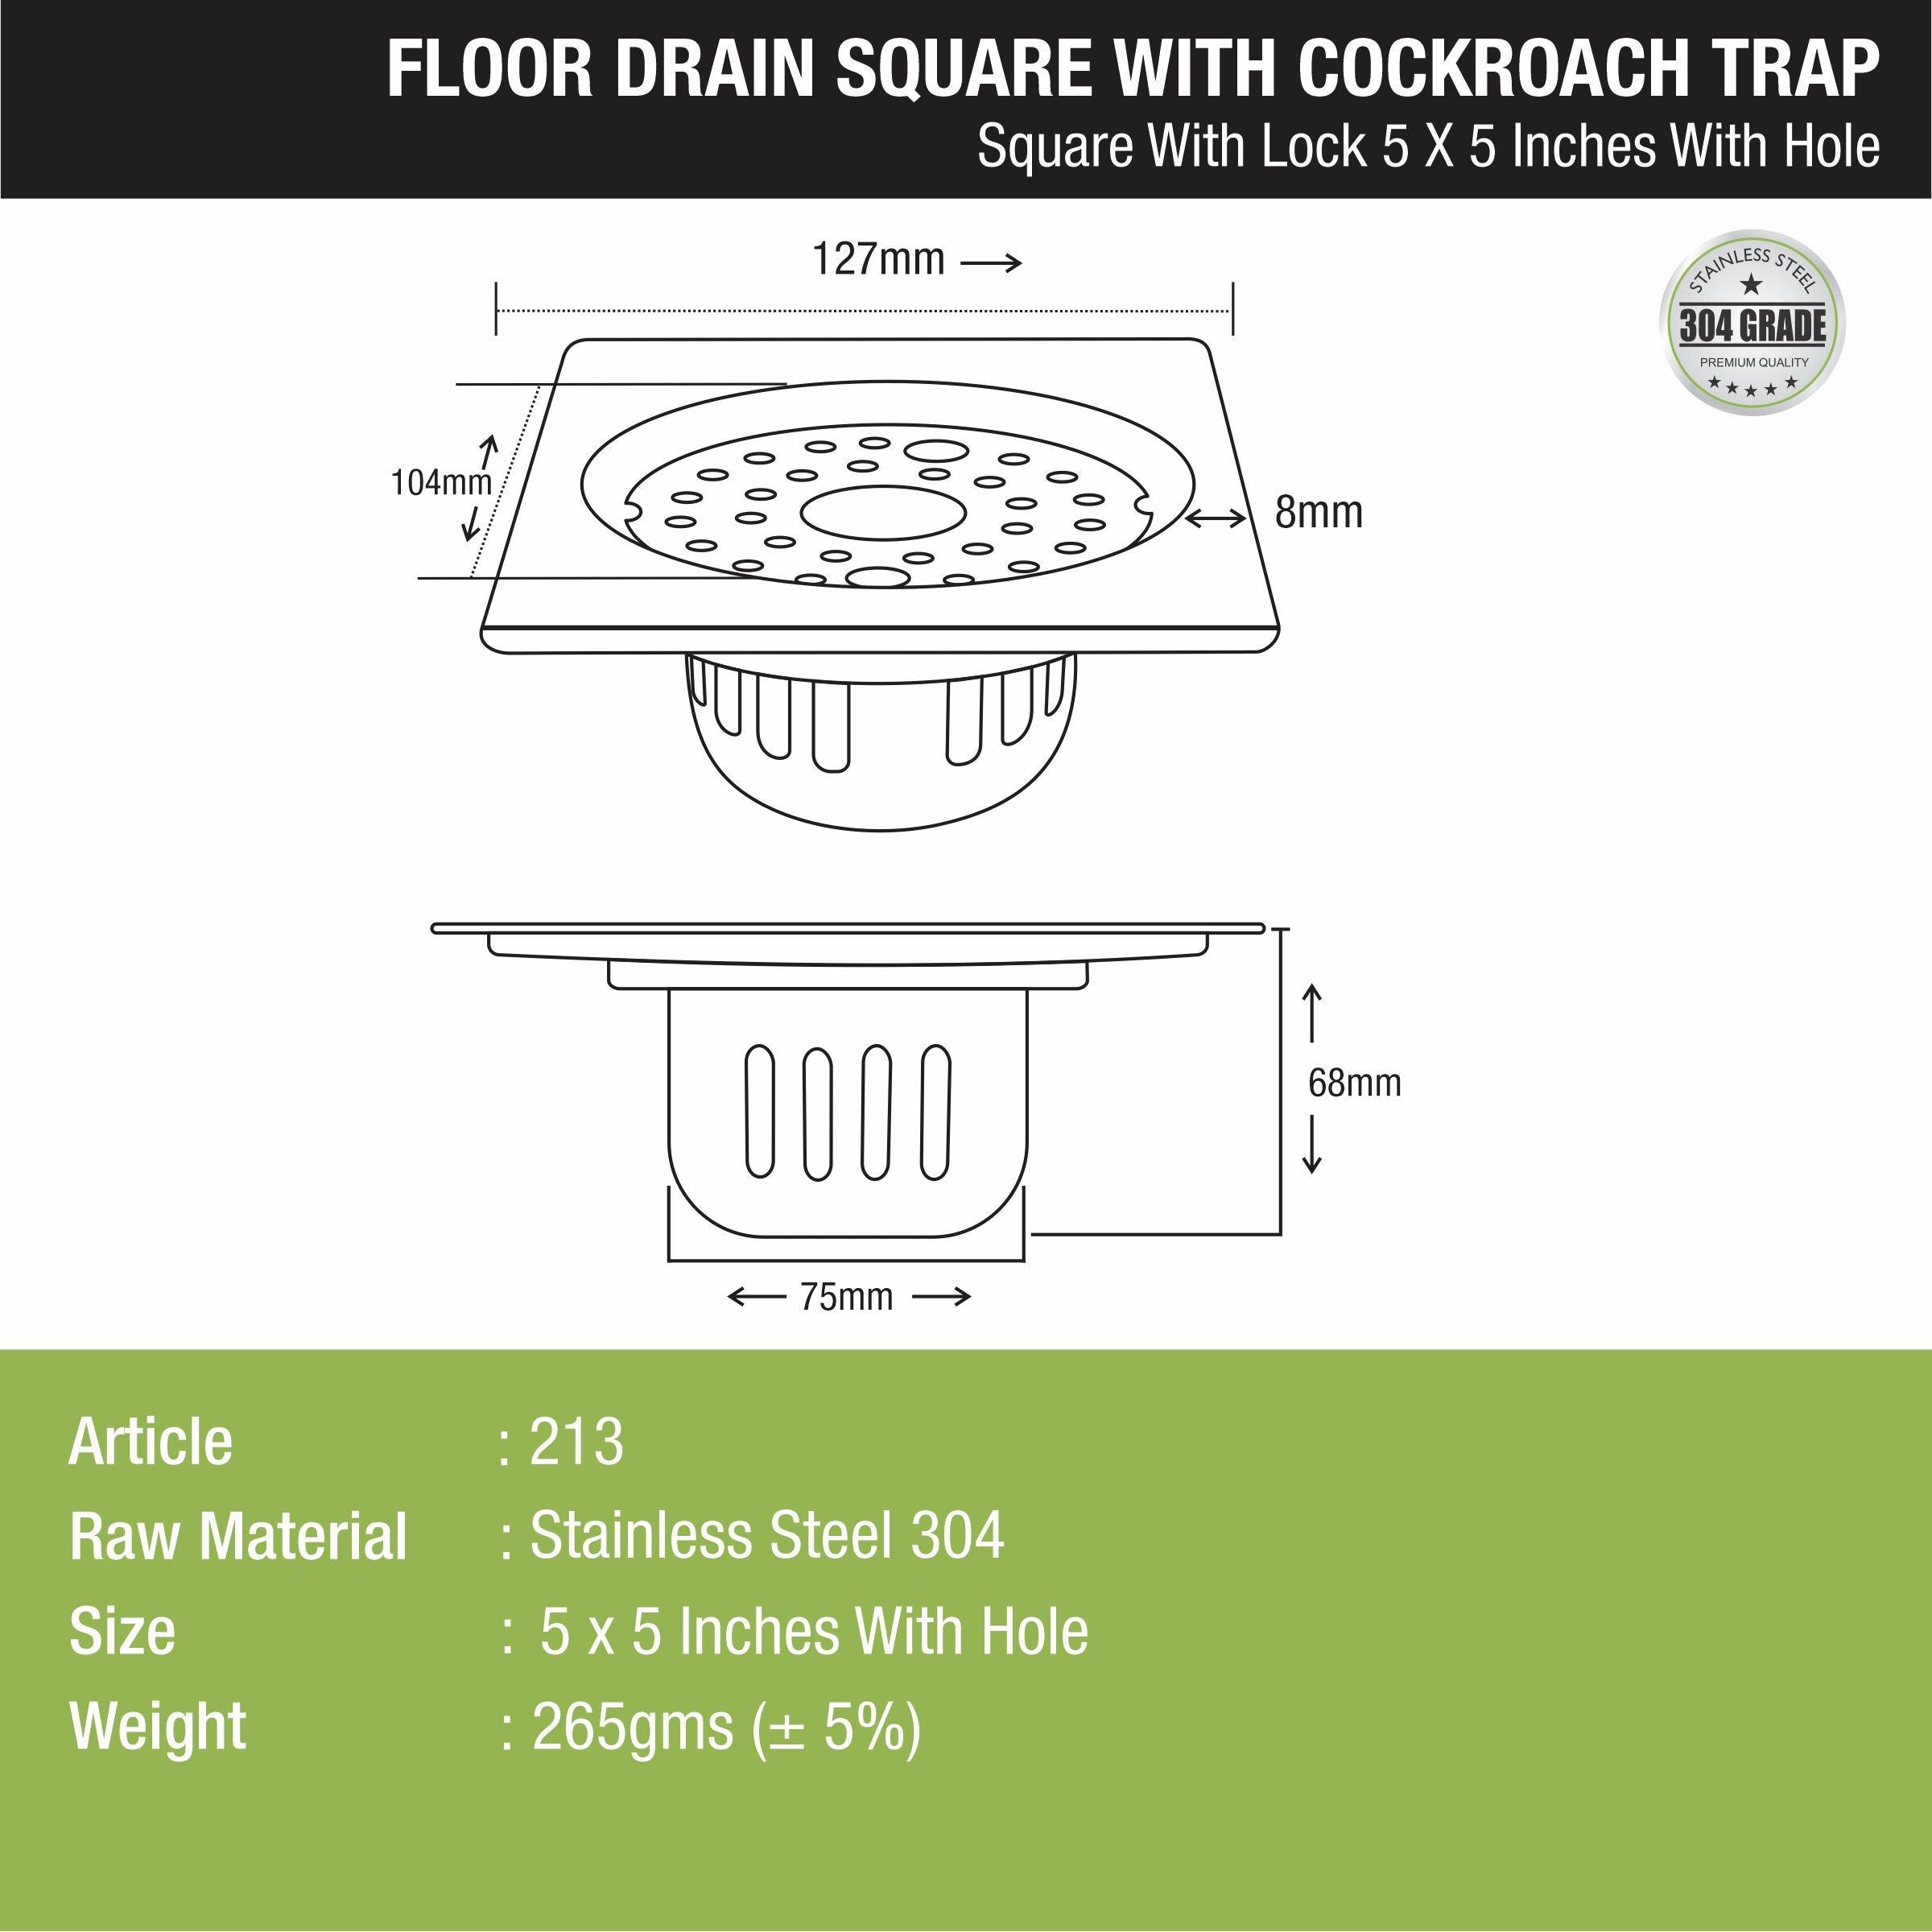 Square Floor Drain (5 x 5 Inches) with Lock, Hole and Cockroach Trap - LIPKA - Lipka Home